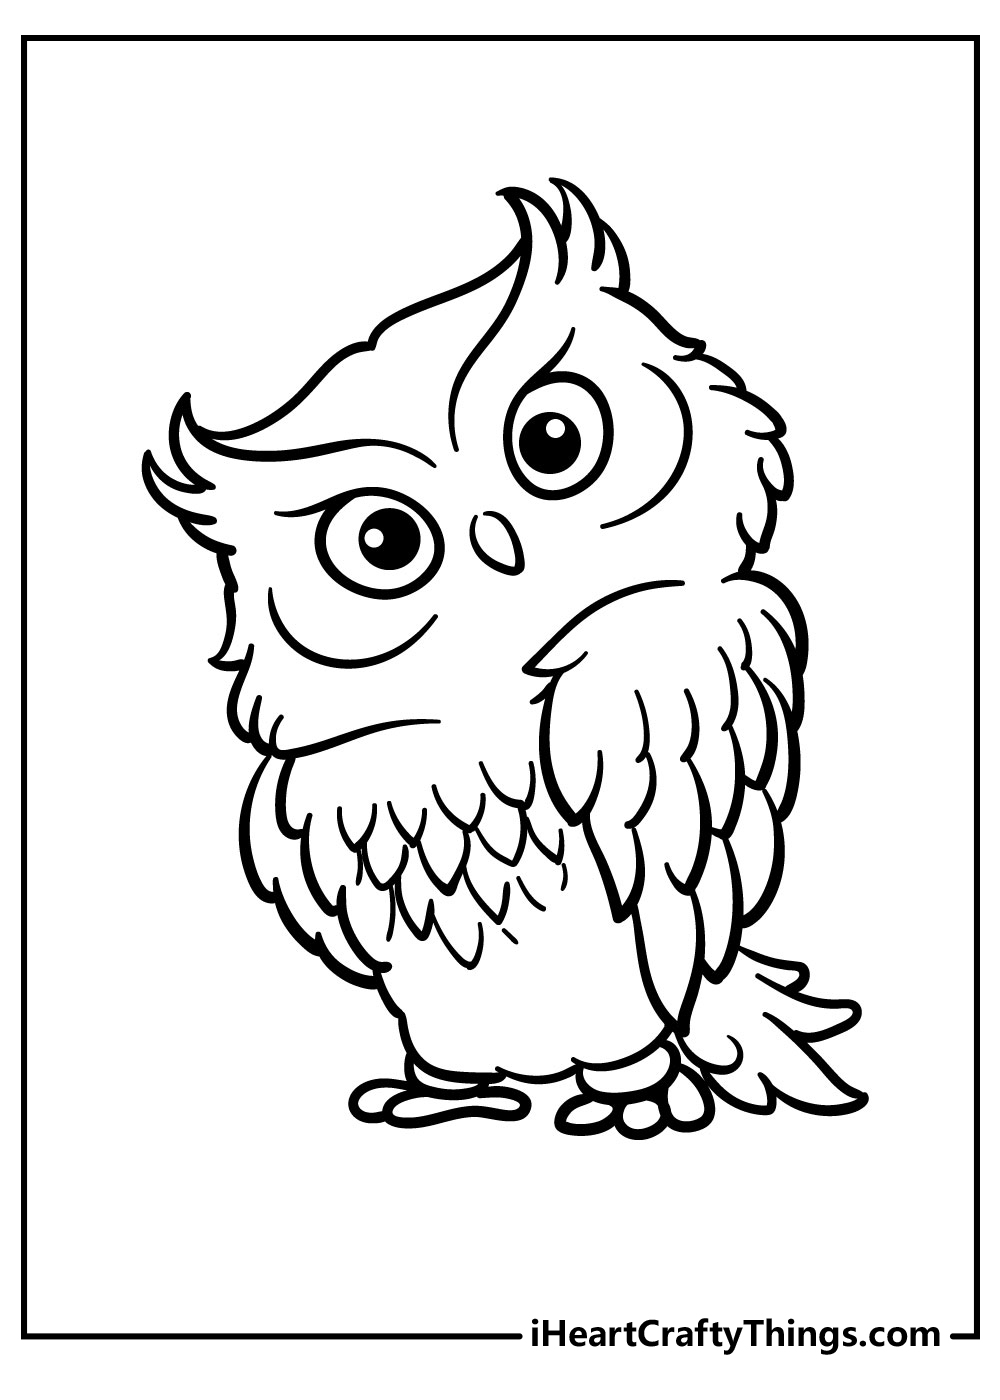 25 Wise Owl Coloring Pages (Updated 2022)